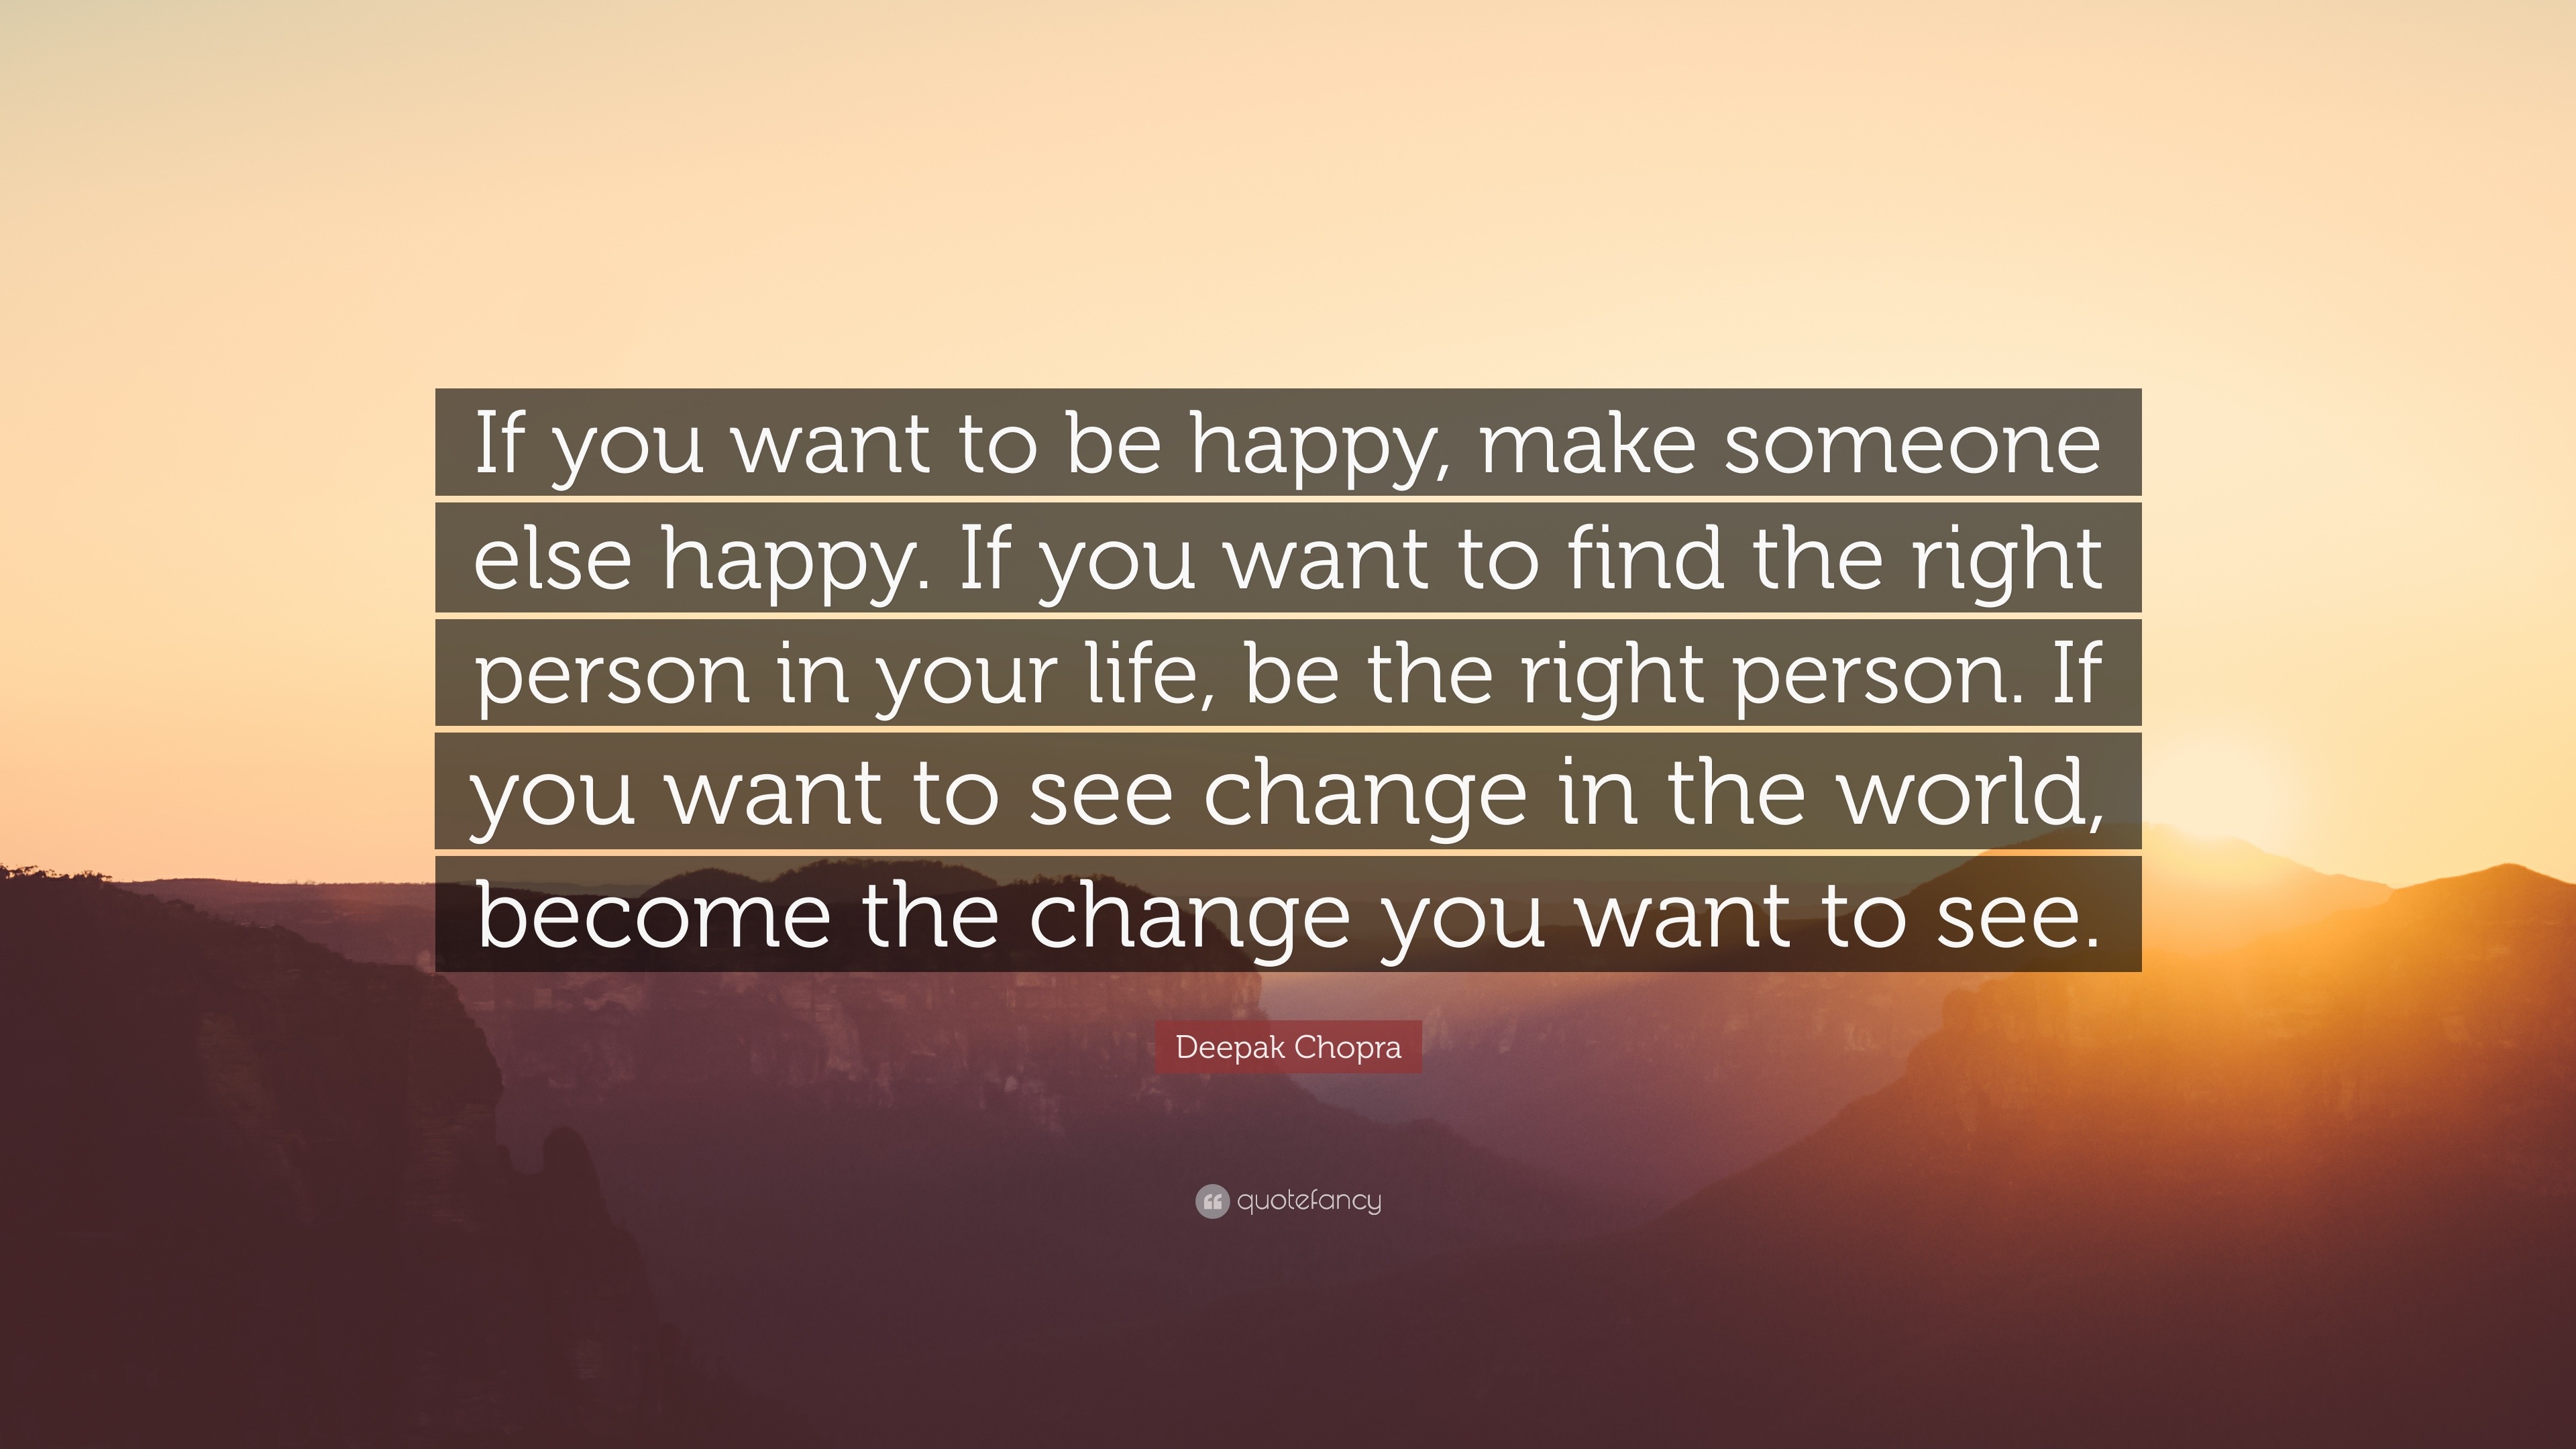 Deepak Chopra Quote If You Want To Be Happy Make Someone Else Happy If You Want To Find The Right Person In Your Life Be The Right Person